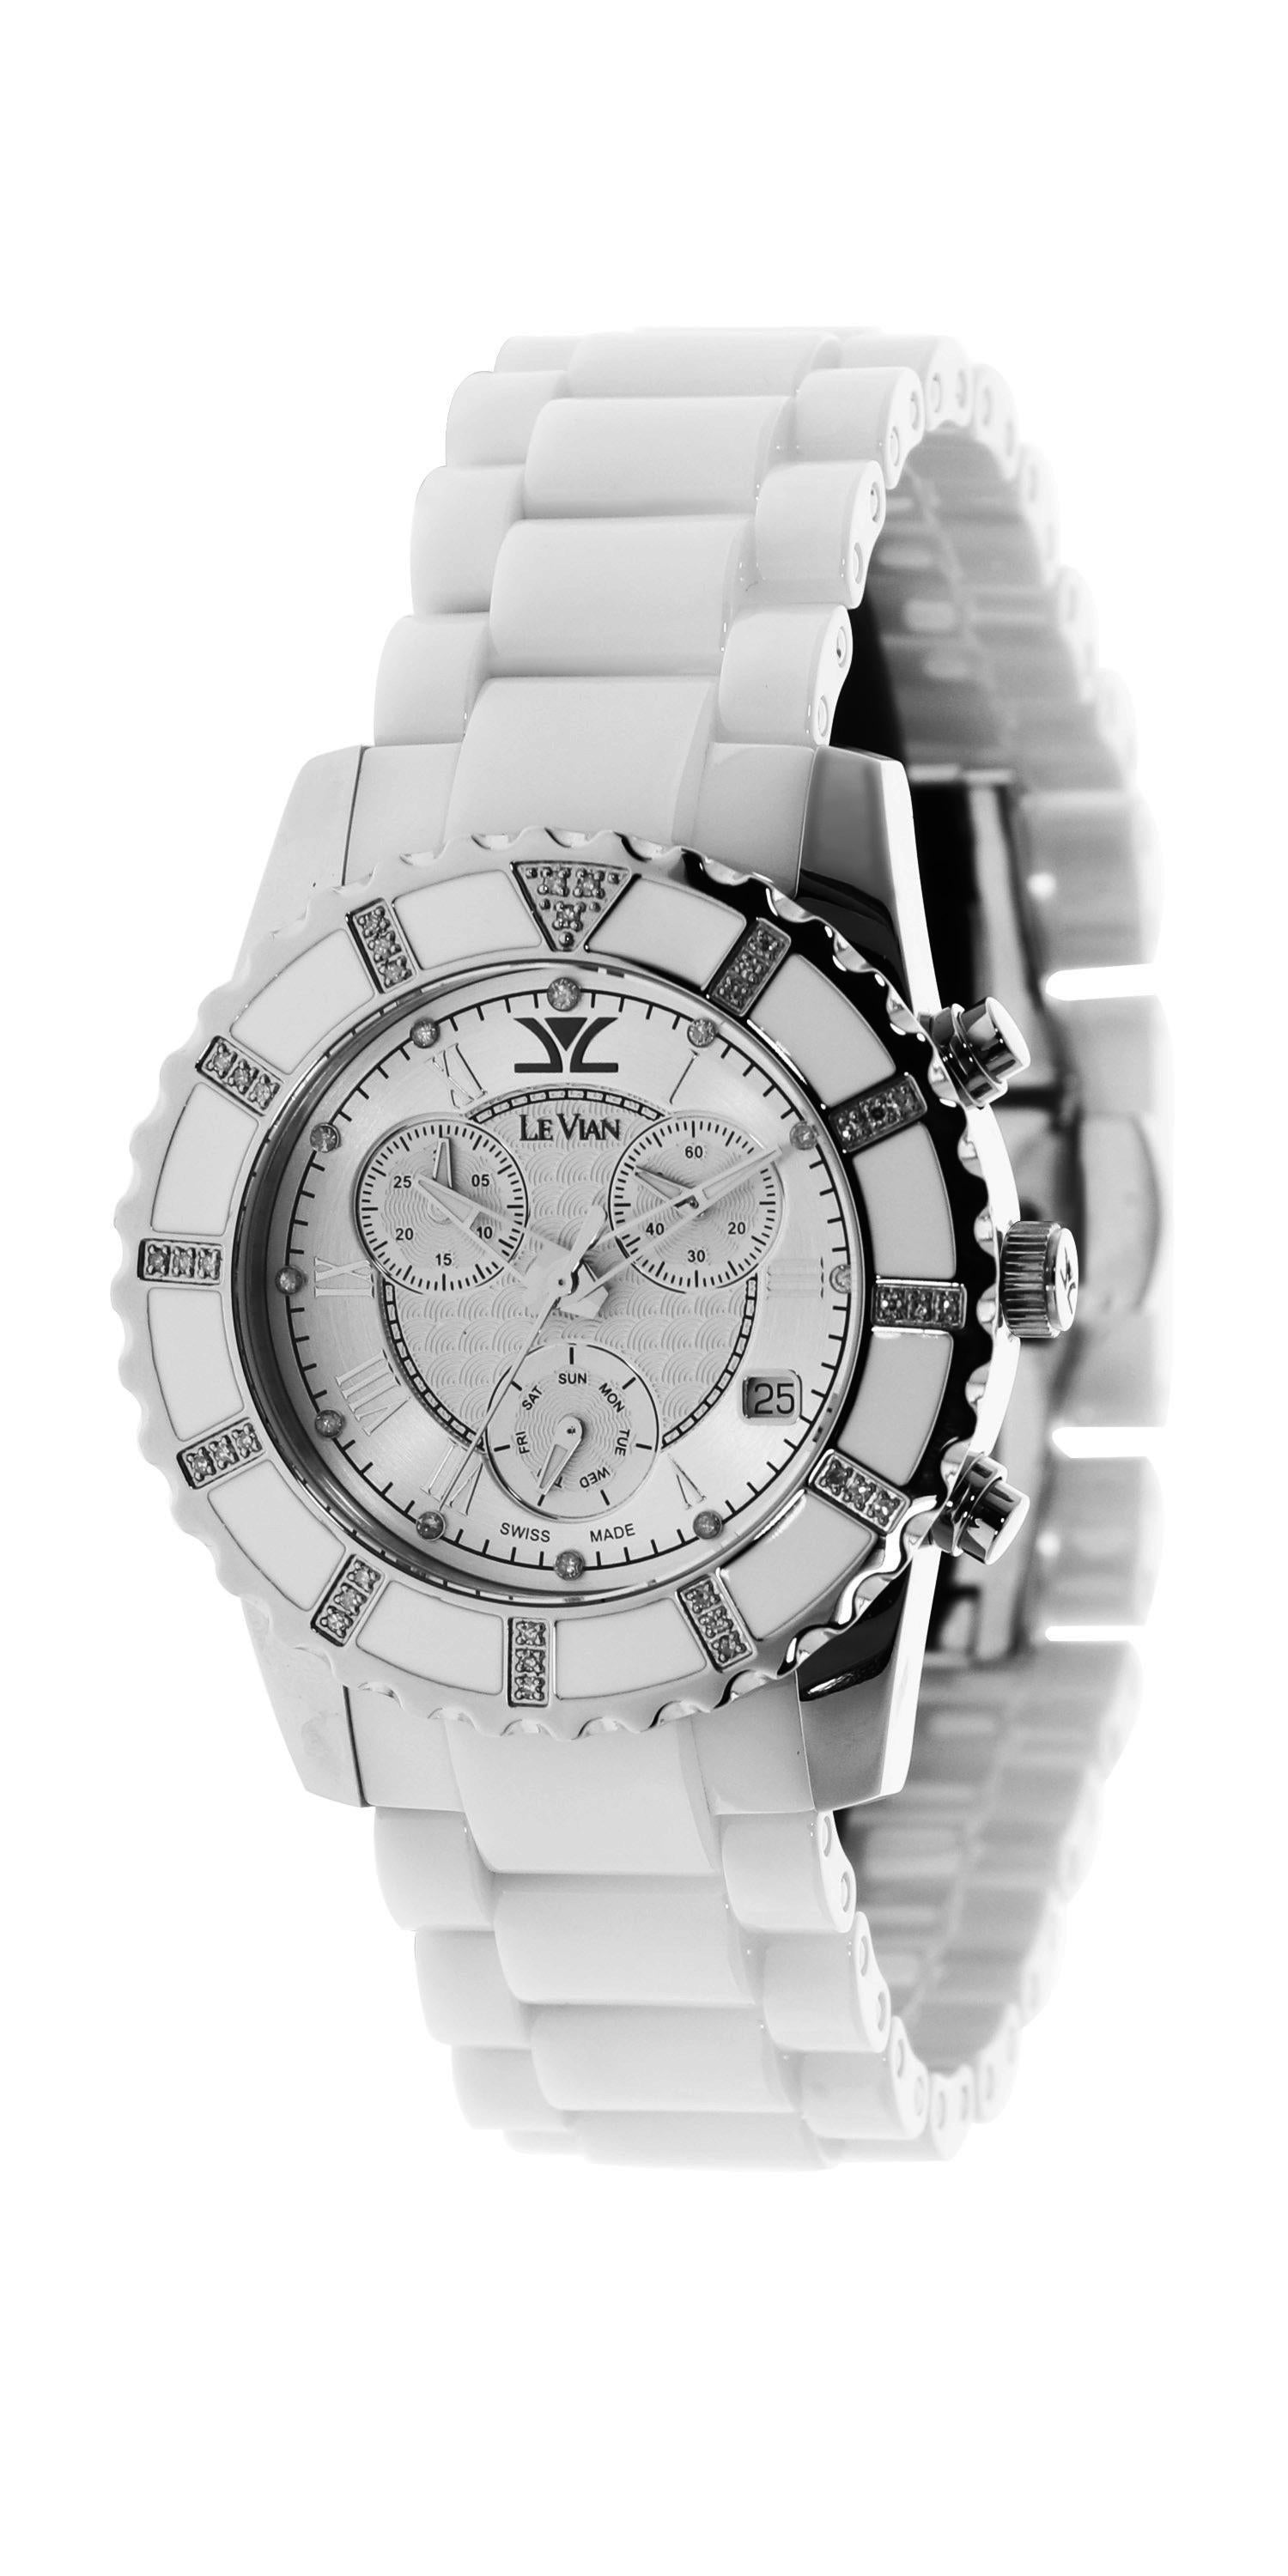 Le Vian 39mm Round Wristwatch featuring 0.24cts of Vanilla Diamonds in Vanilla Stainless Steel and a Ceramic Band.
